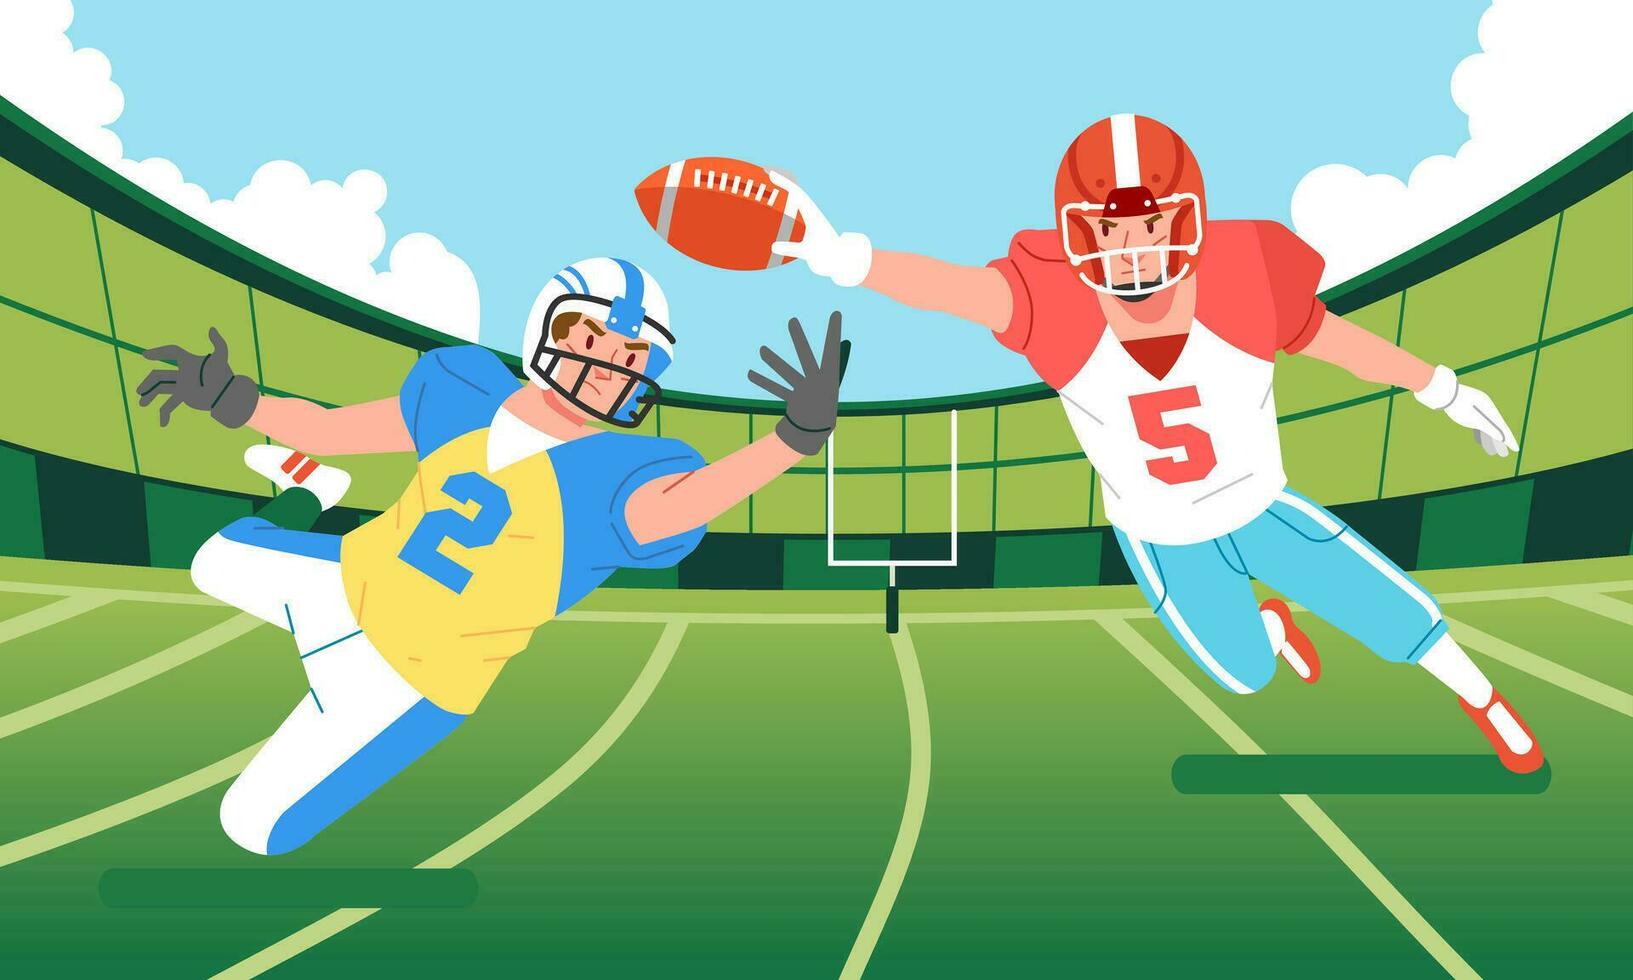 American football players jump to fight for the opponents ball in the field vector